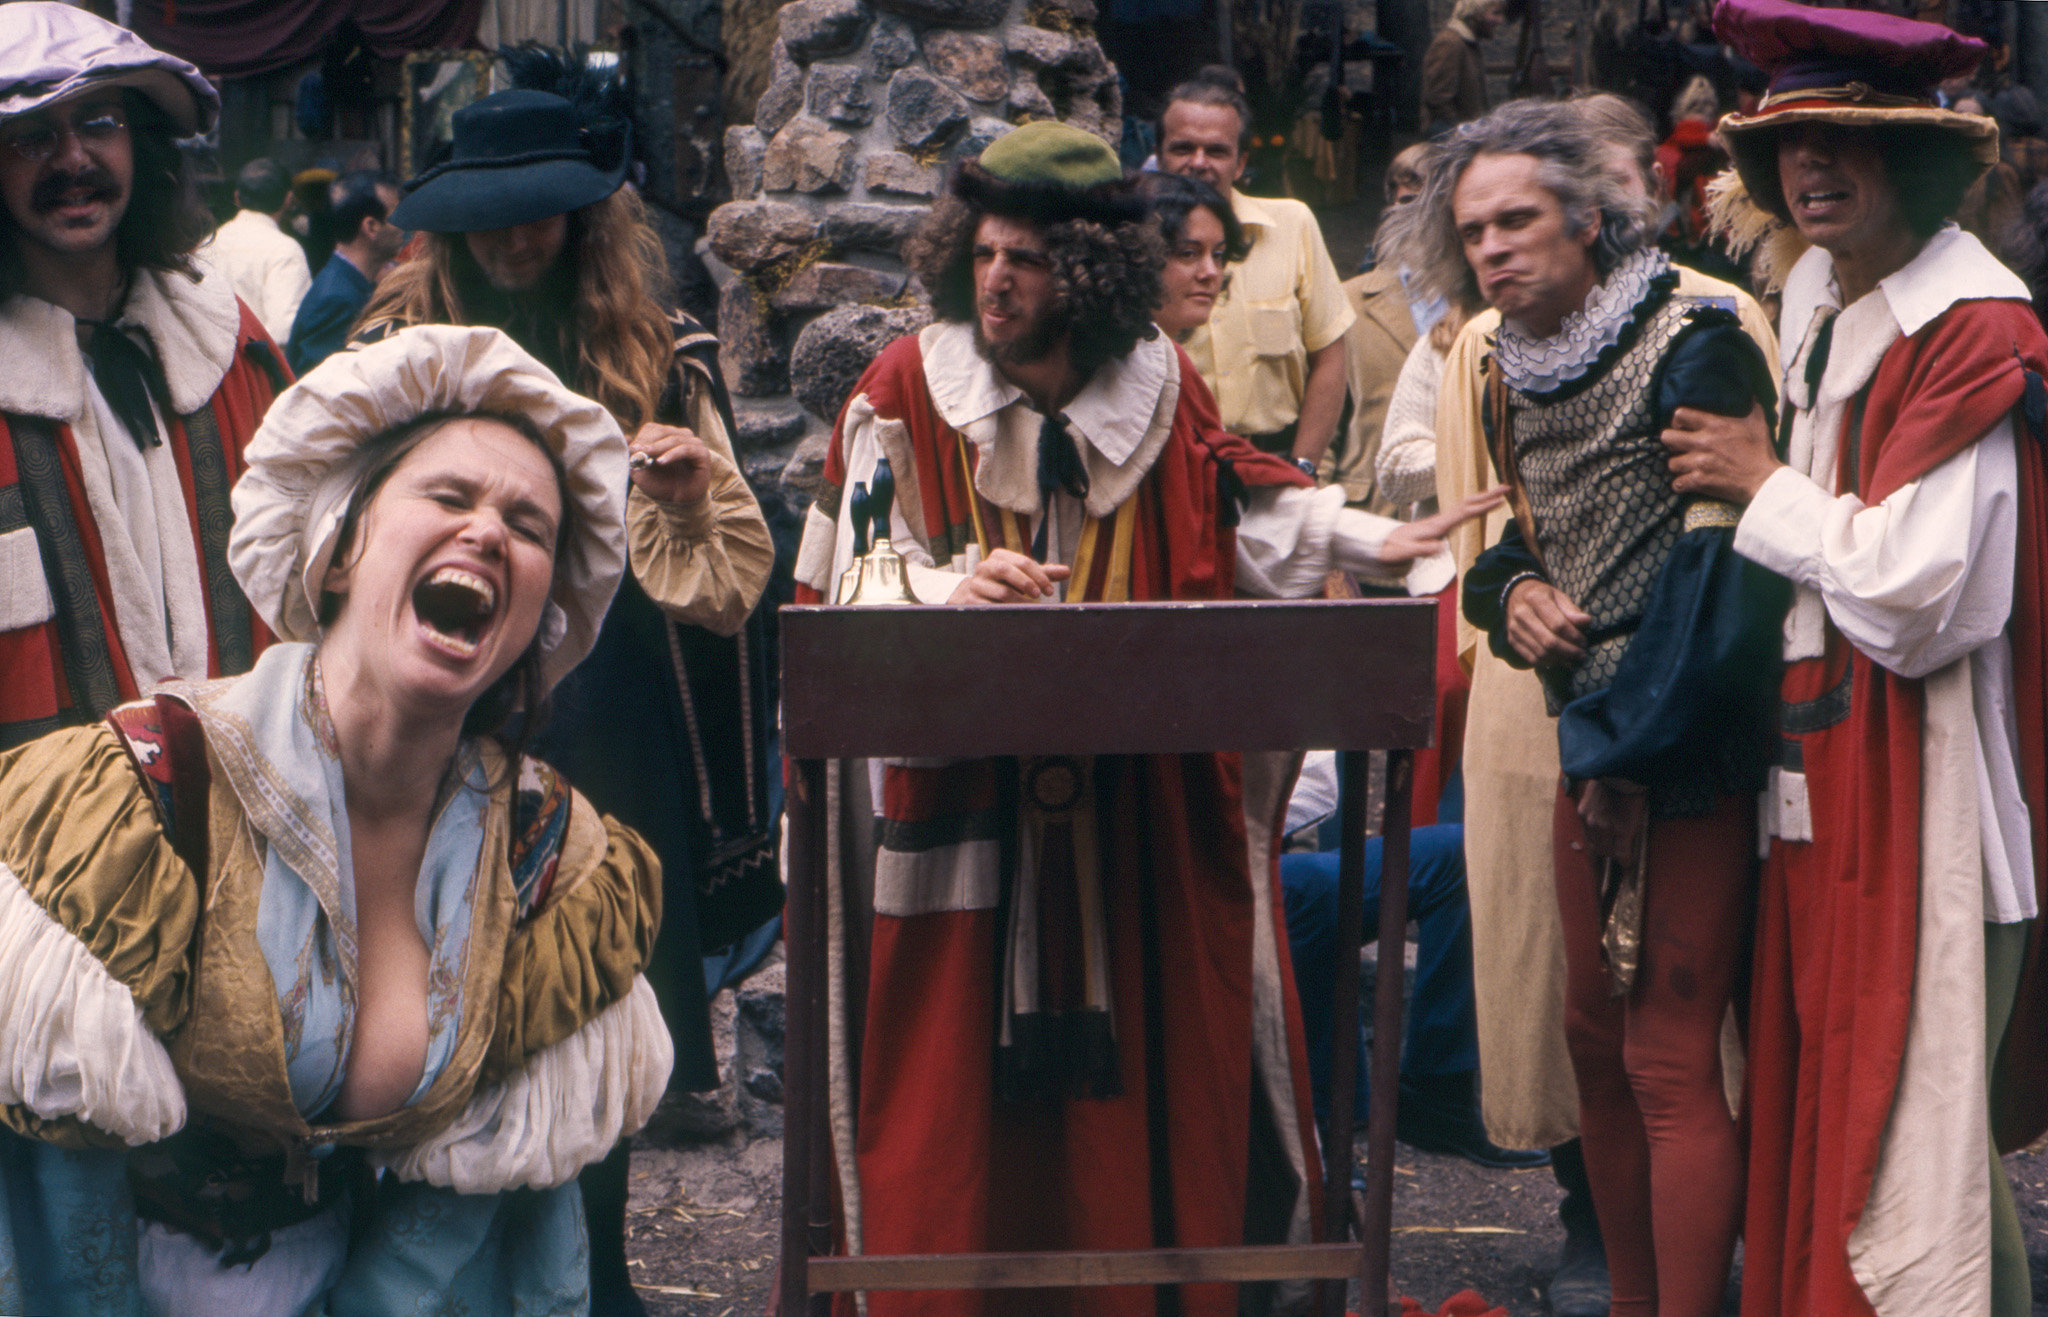 A lusty moment during the Northern California Renaissance Pleasure Faire at Black Point Forest in Novato, California that I caught on 35mm Ektachrome. View full size.